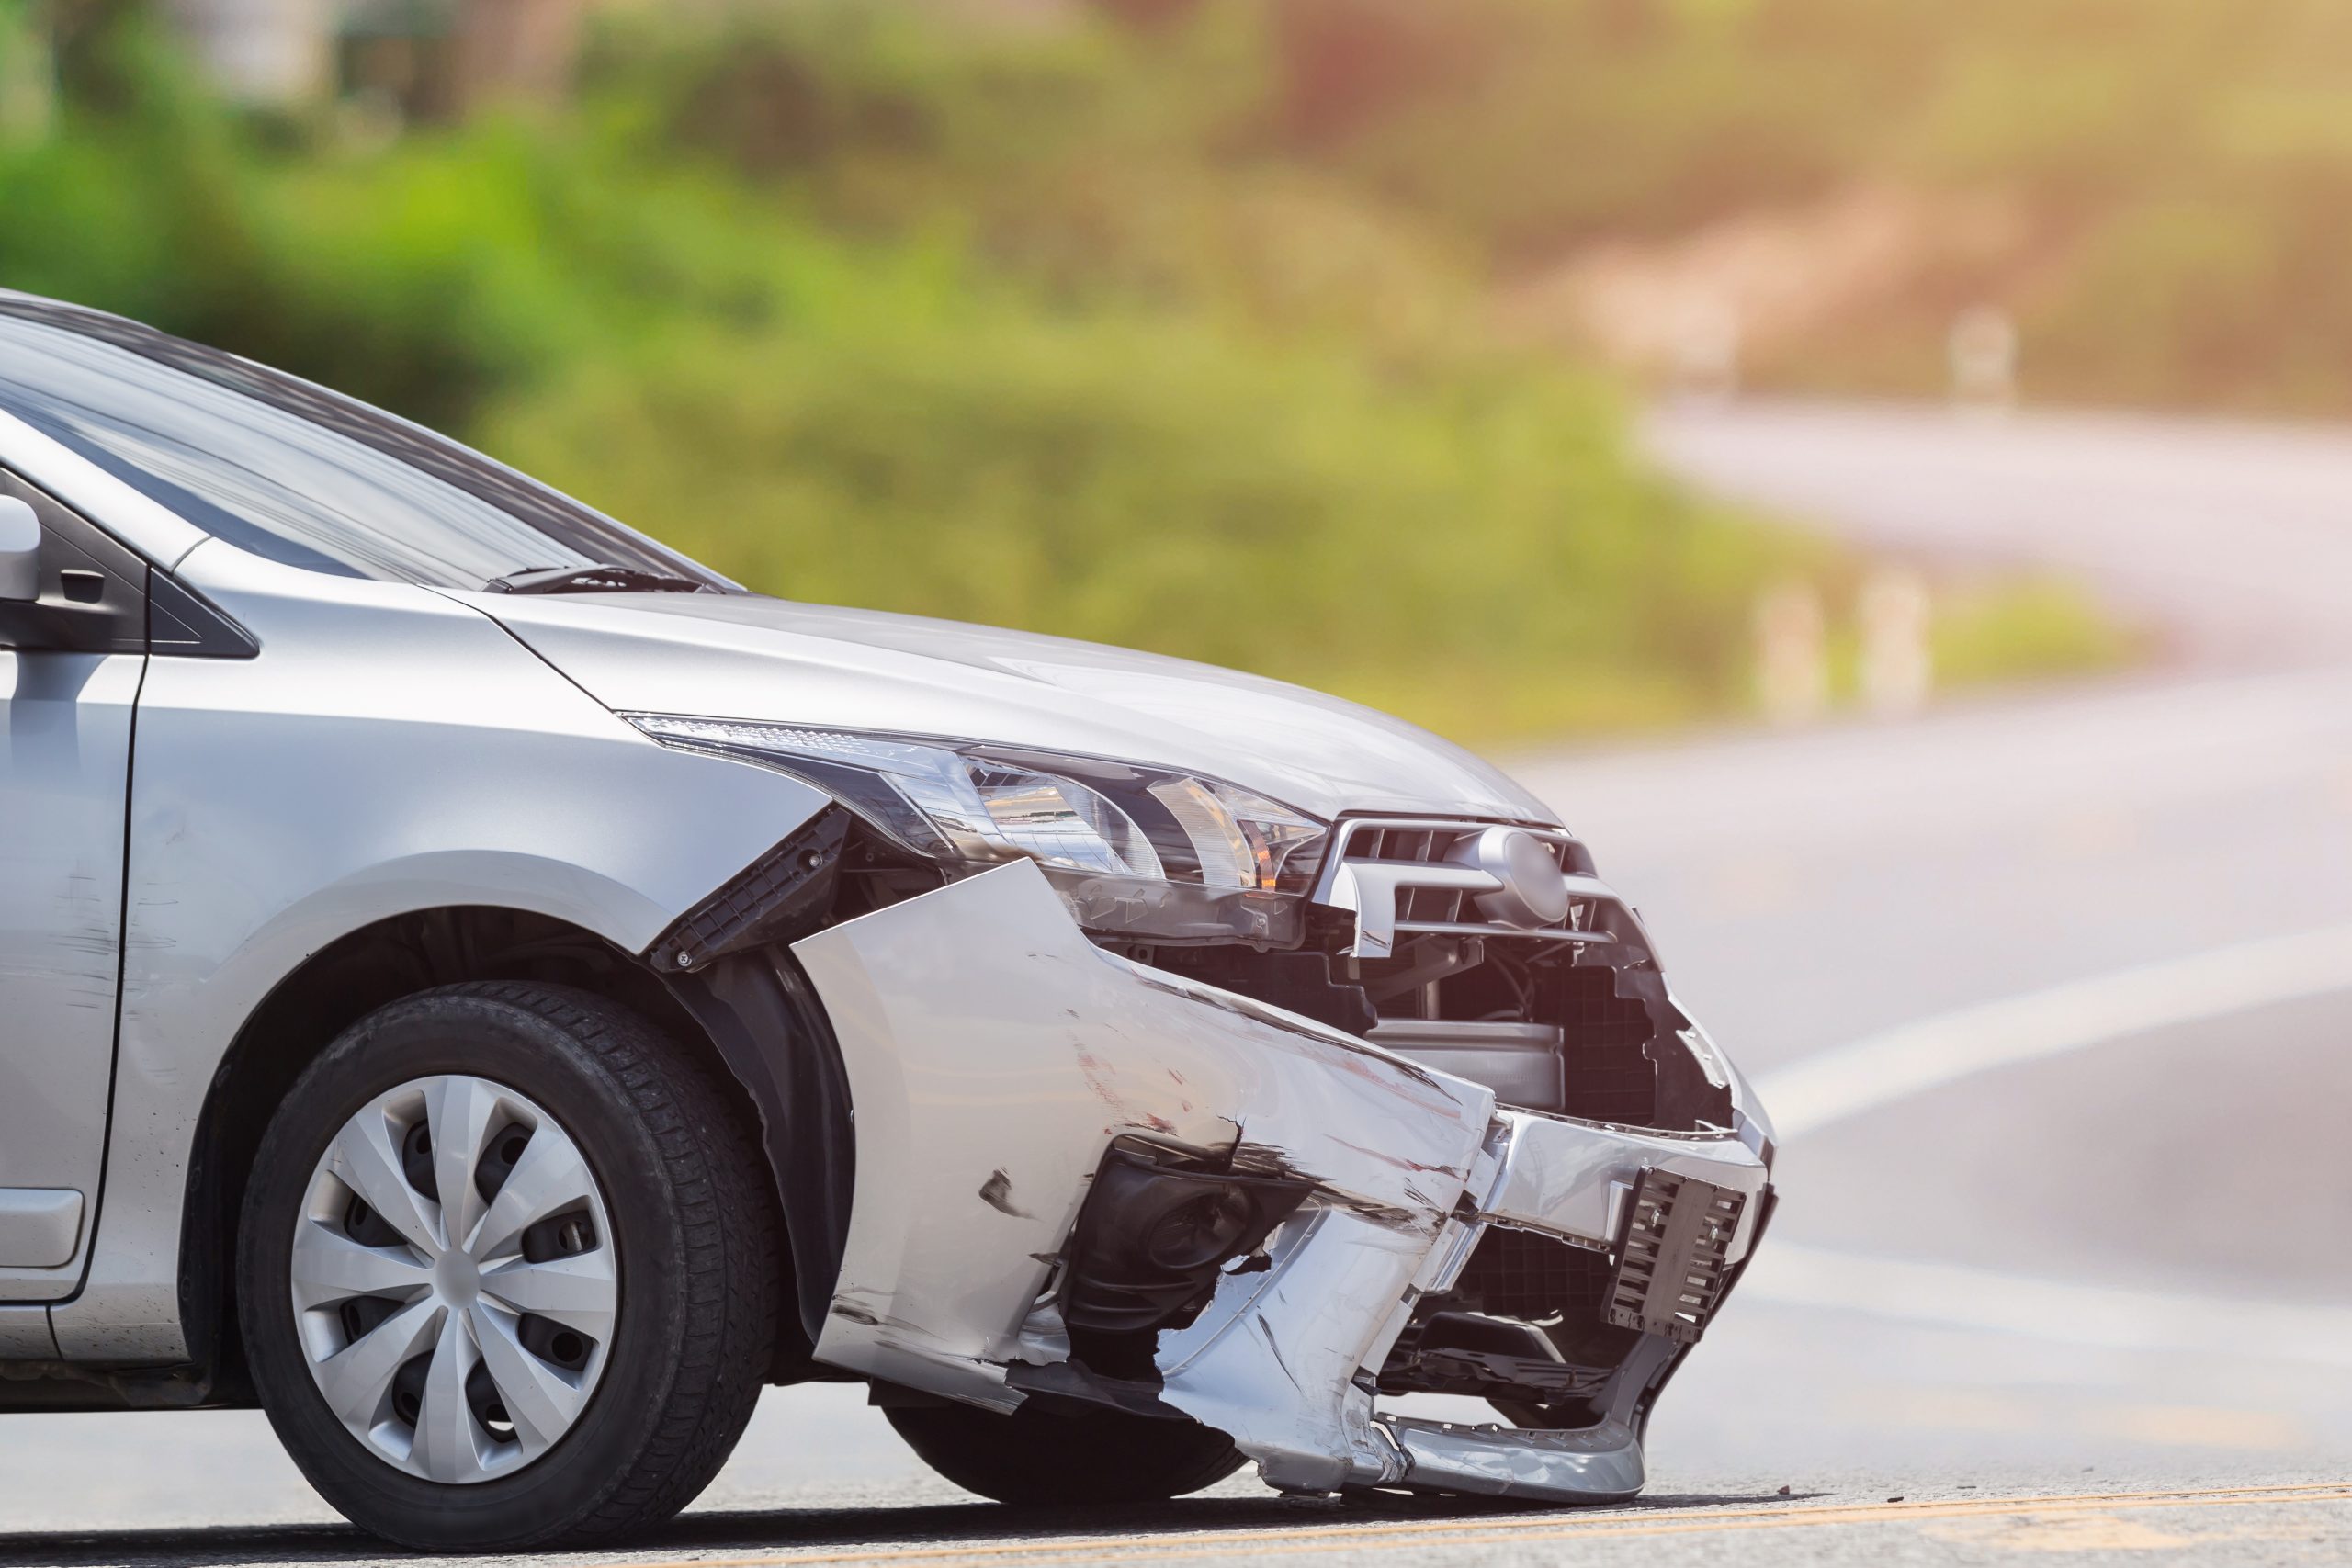 Can You File a Claim Against the Government for an Auto Accident Injury?